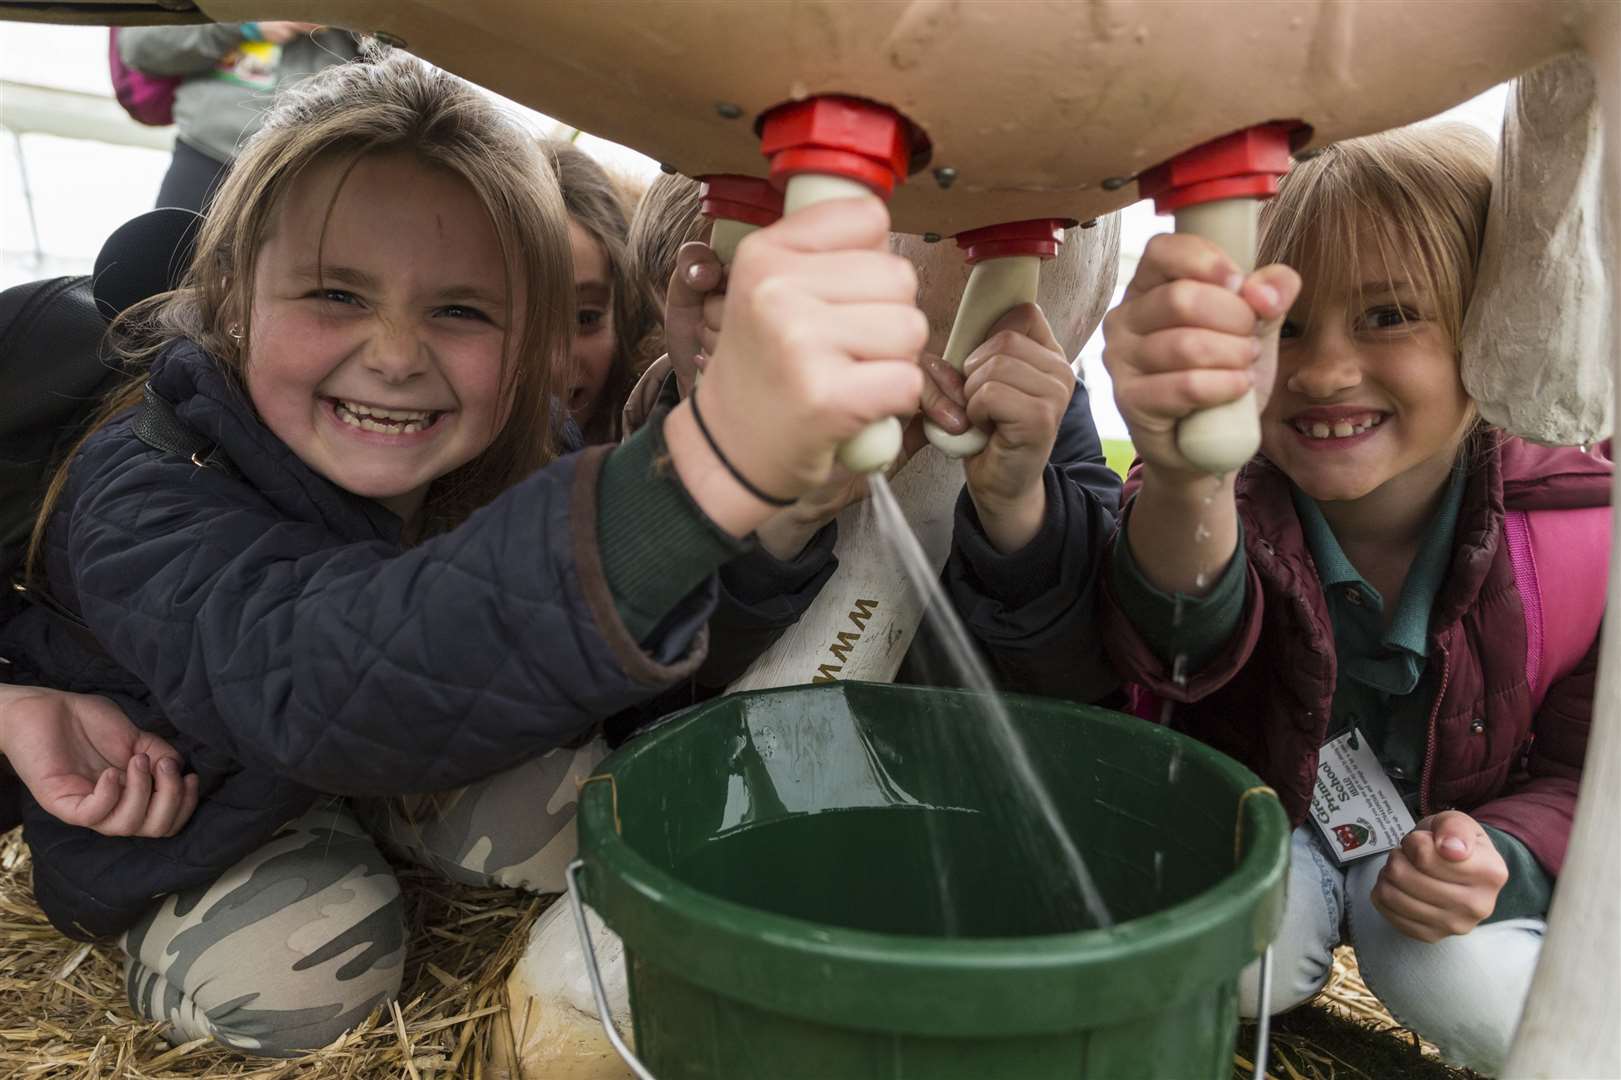 The Living Land event a few years ago saw children visit the Kent Showground Picture: Martin Apps